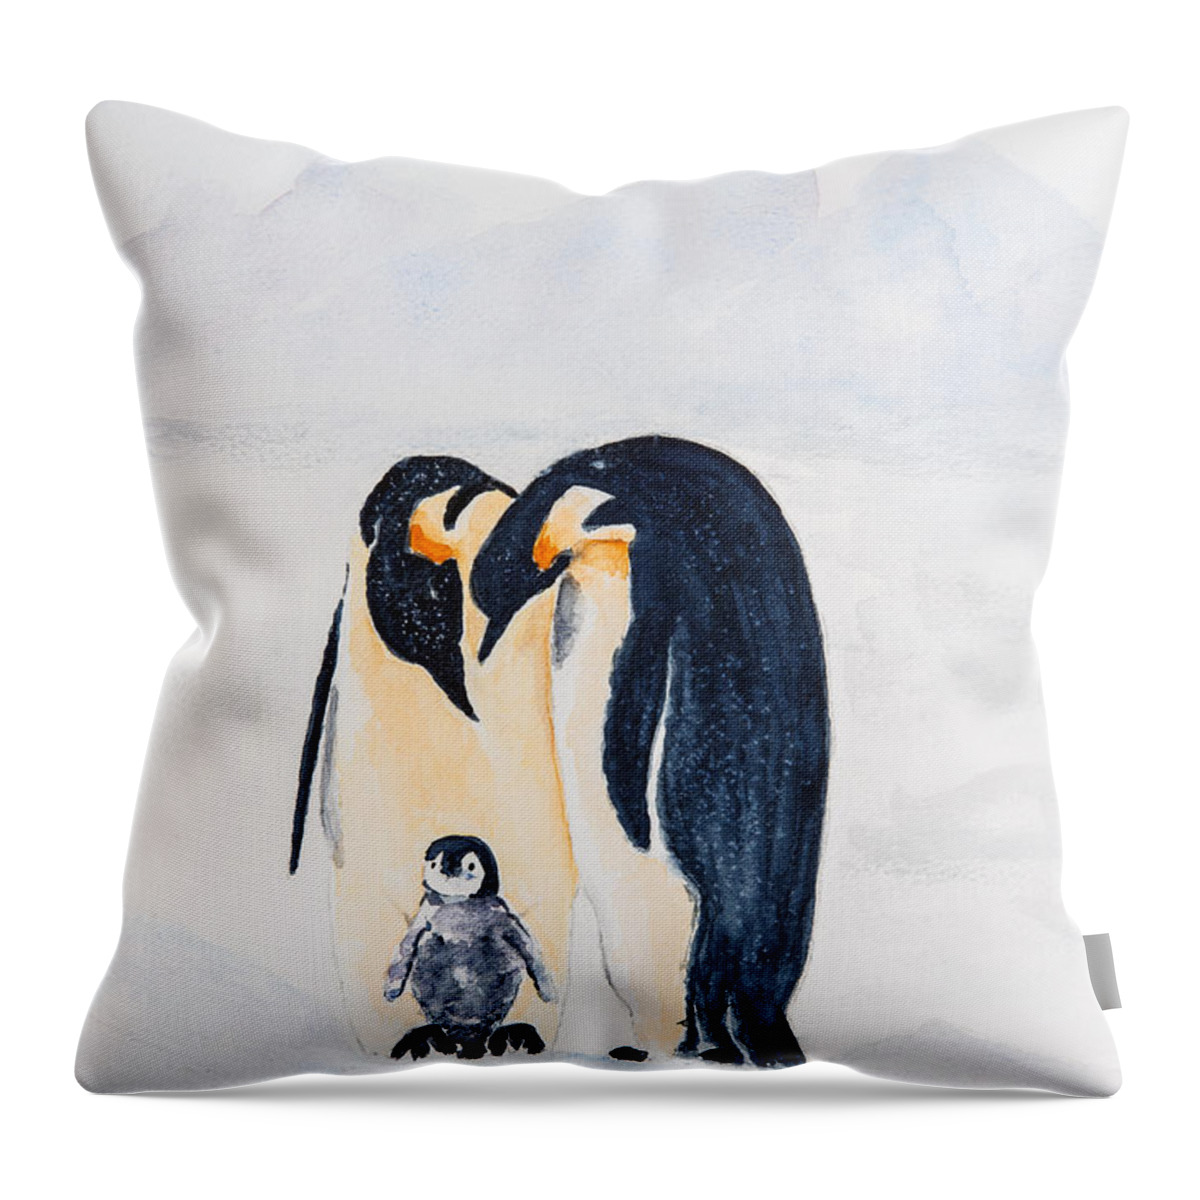 Birds Penguins Throw Pillow featuring the painting Penguin Family by Elvira Ingram